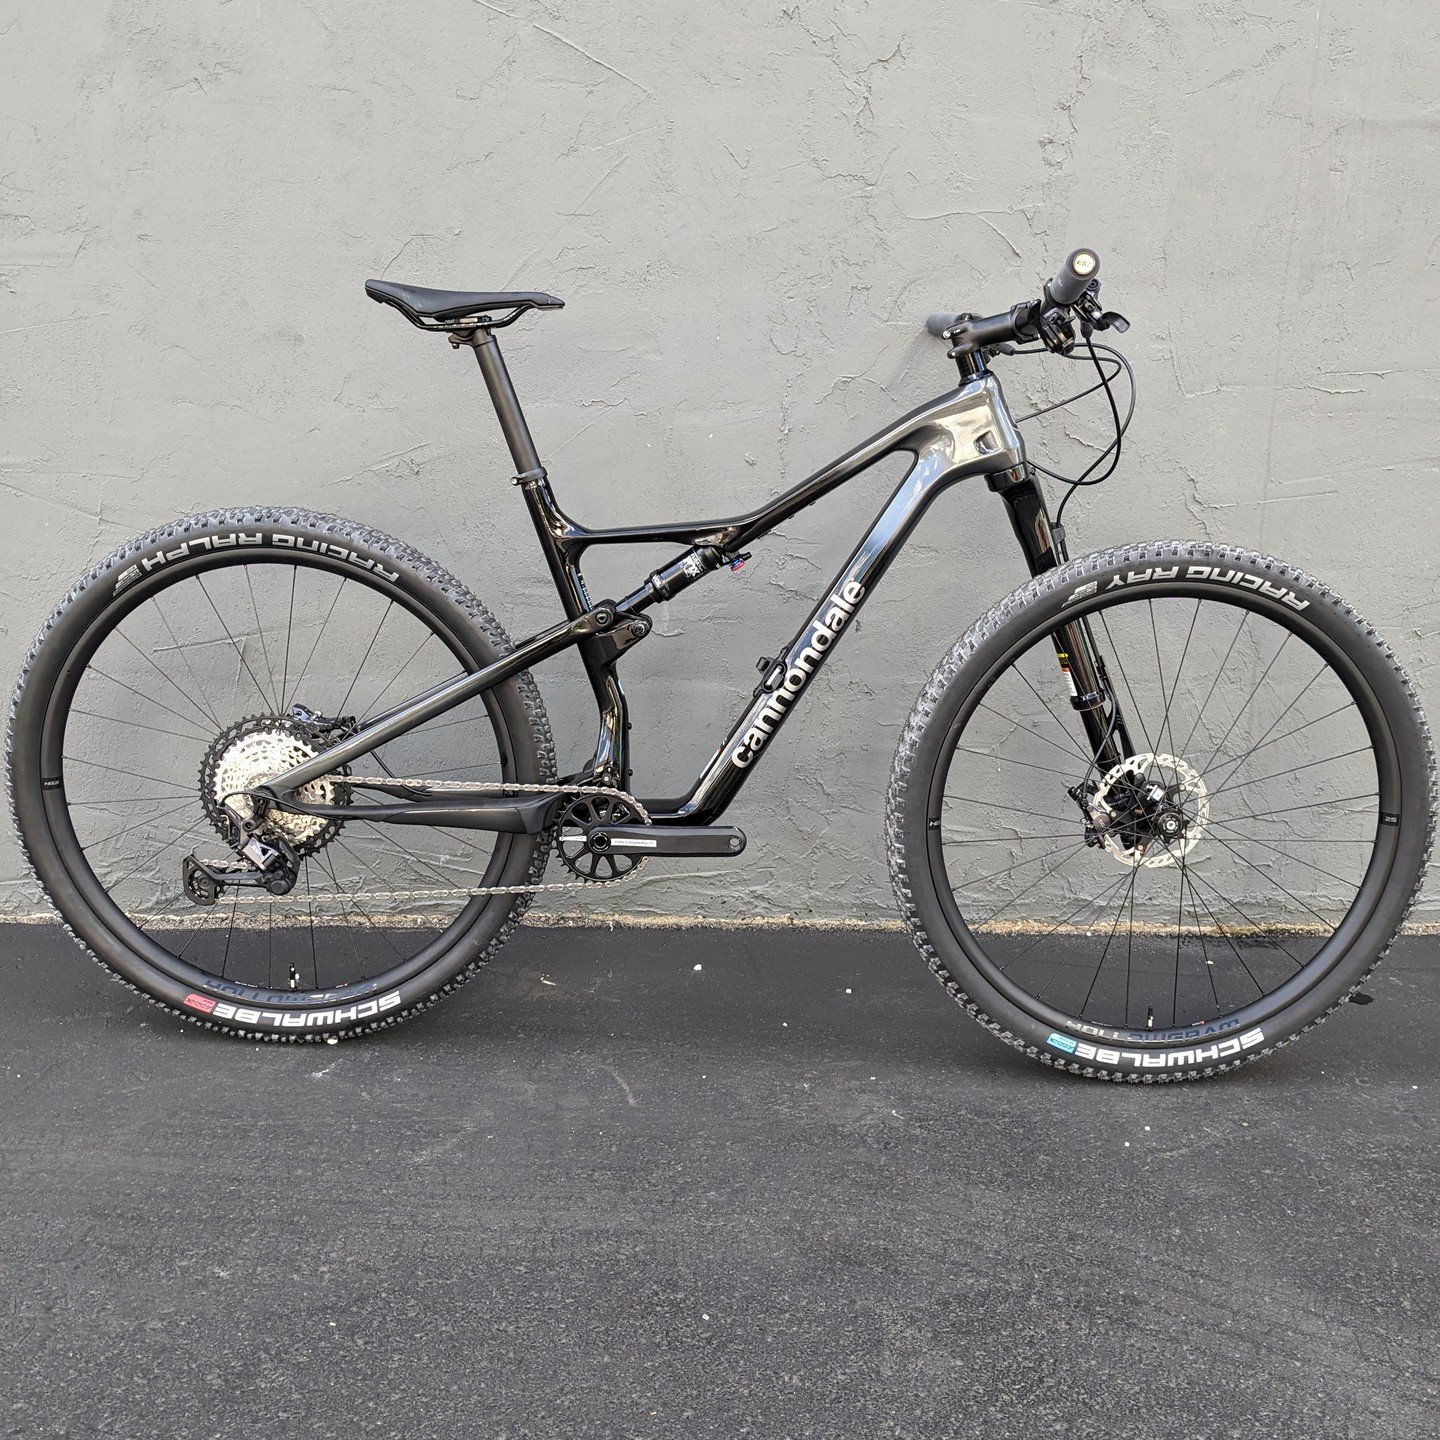 Nick, this bike is going to set you free. Cannondale Scalpel with the Lefty Ocho, carbon Hollowgram wheels and full XT drivetrain &amp; brakes. This was designed to be a rocket ship, we hope you're ready.
@ridecannondale 
@shimanomtb 
@schwalbetires 